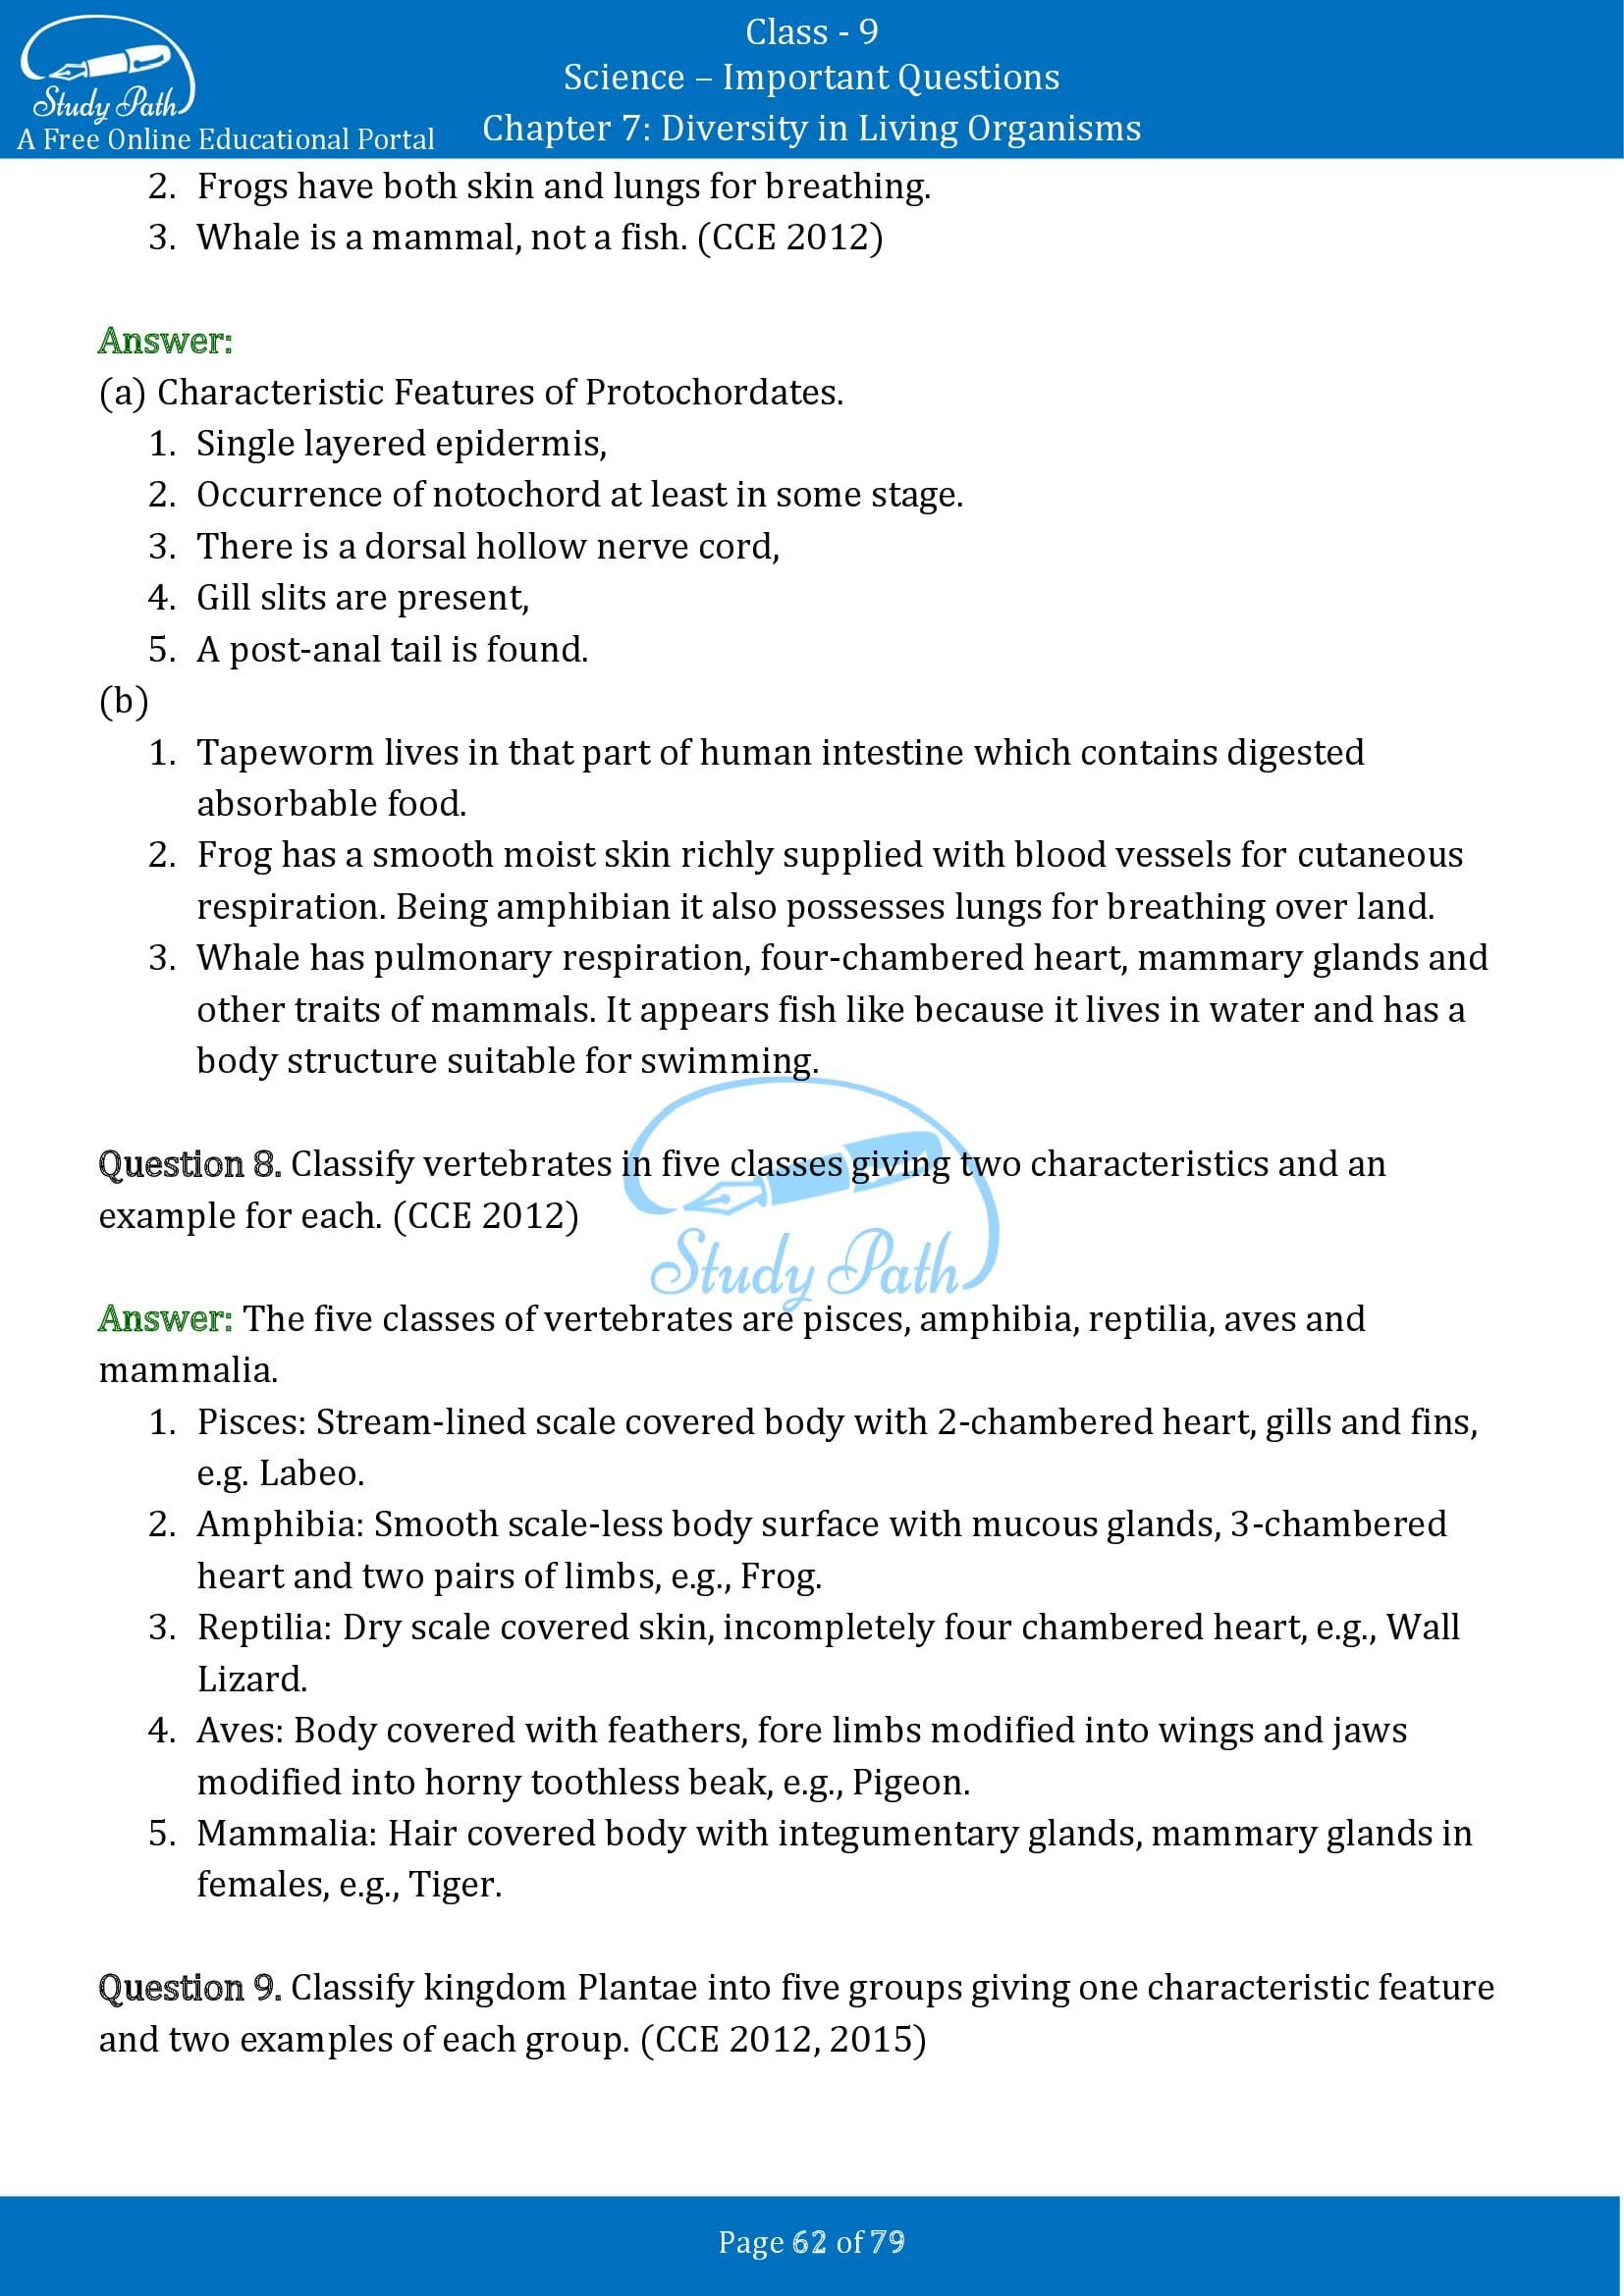 Important Questions for Class 9 Science Chapter 7 Diversity in Living Organisms 00062